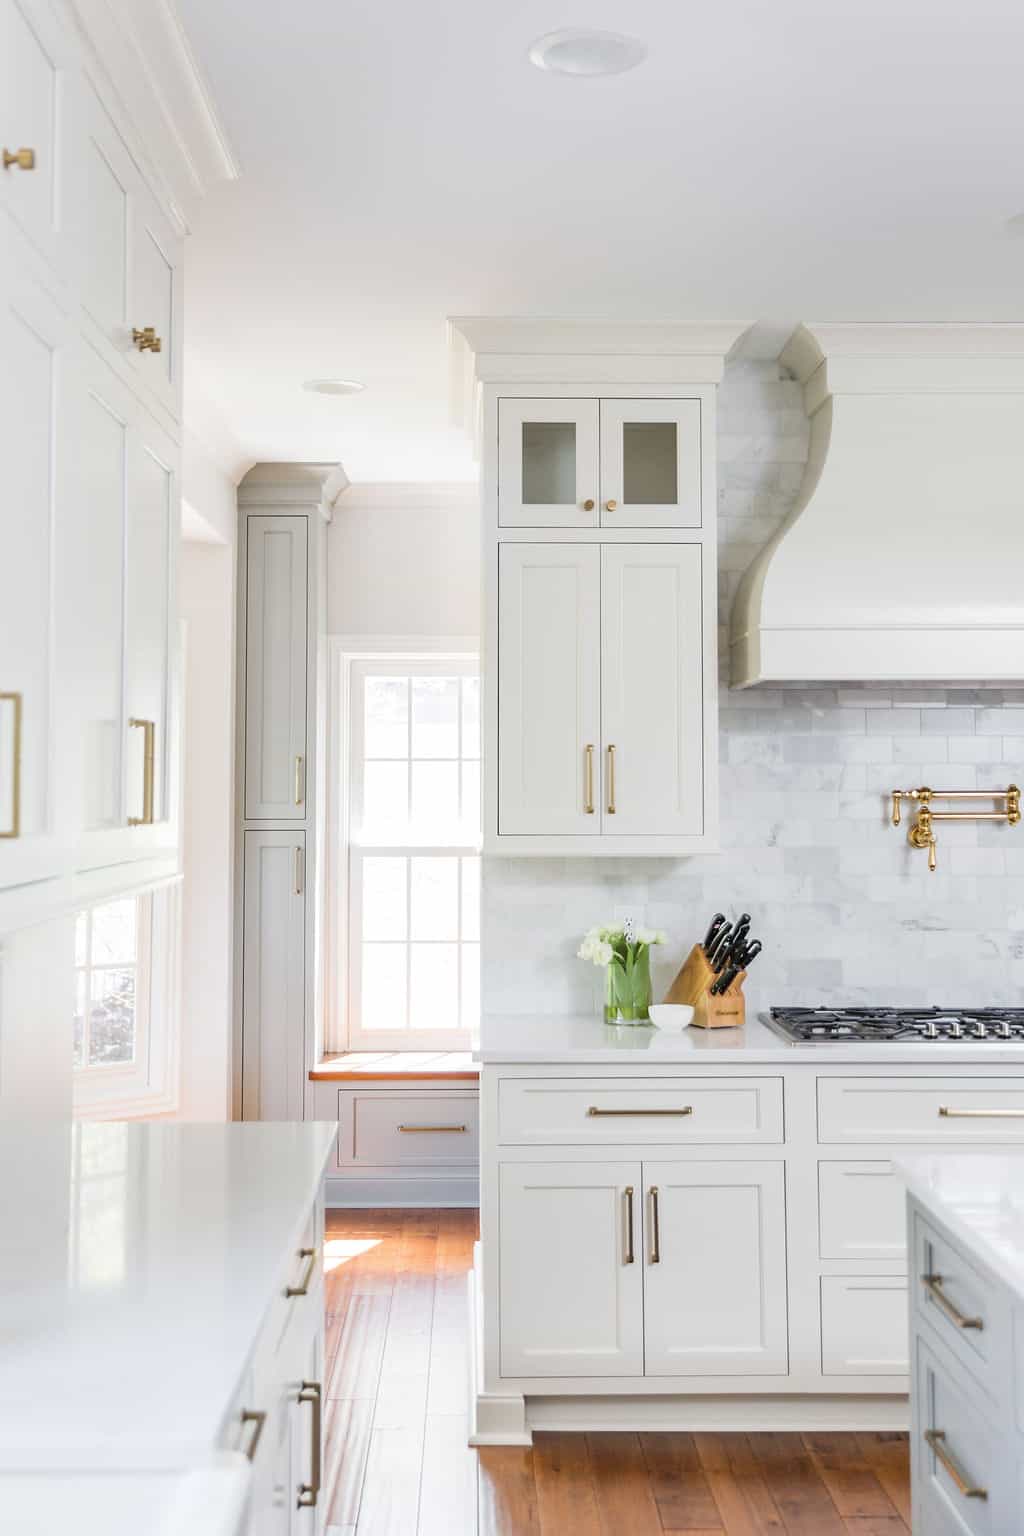 Nicholas Design Build | A remodeled kitchen with white cabinets and gold accents.